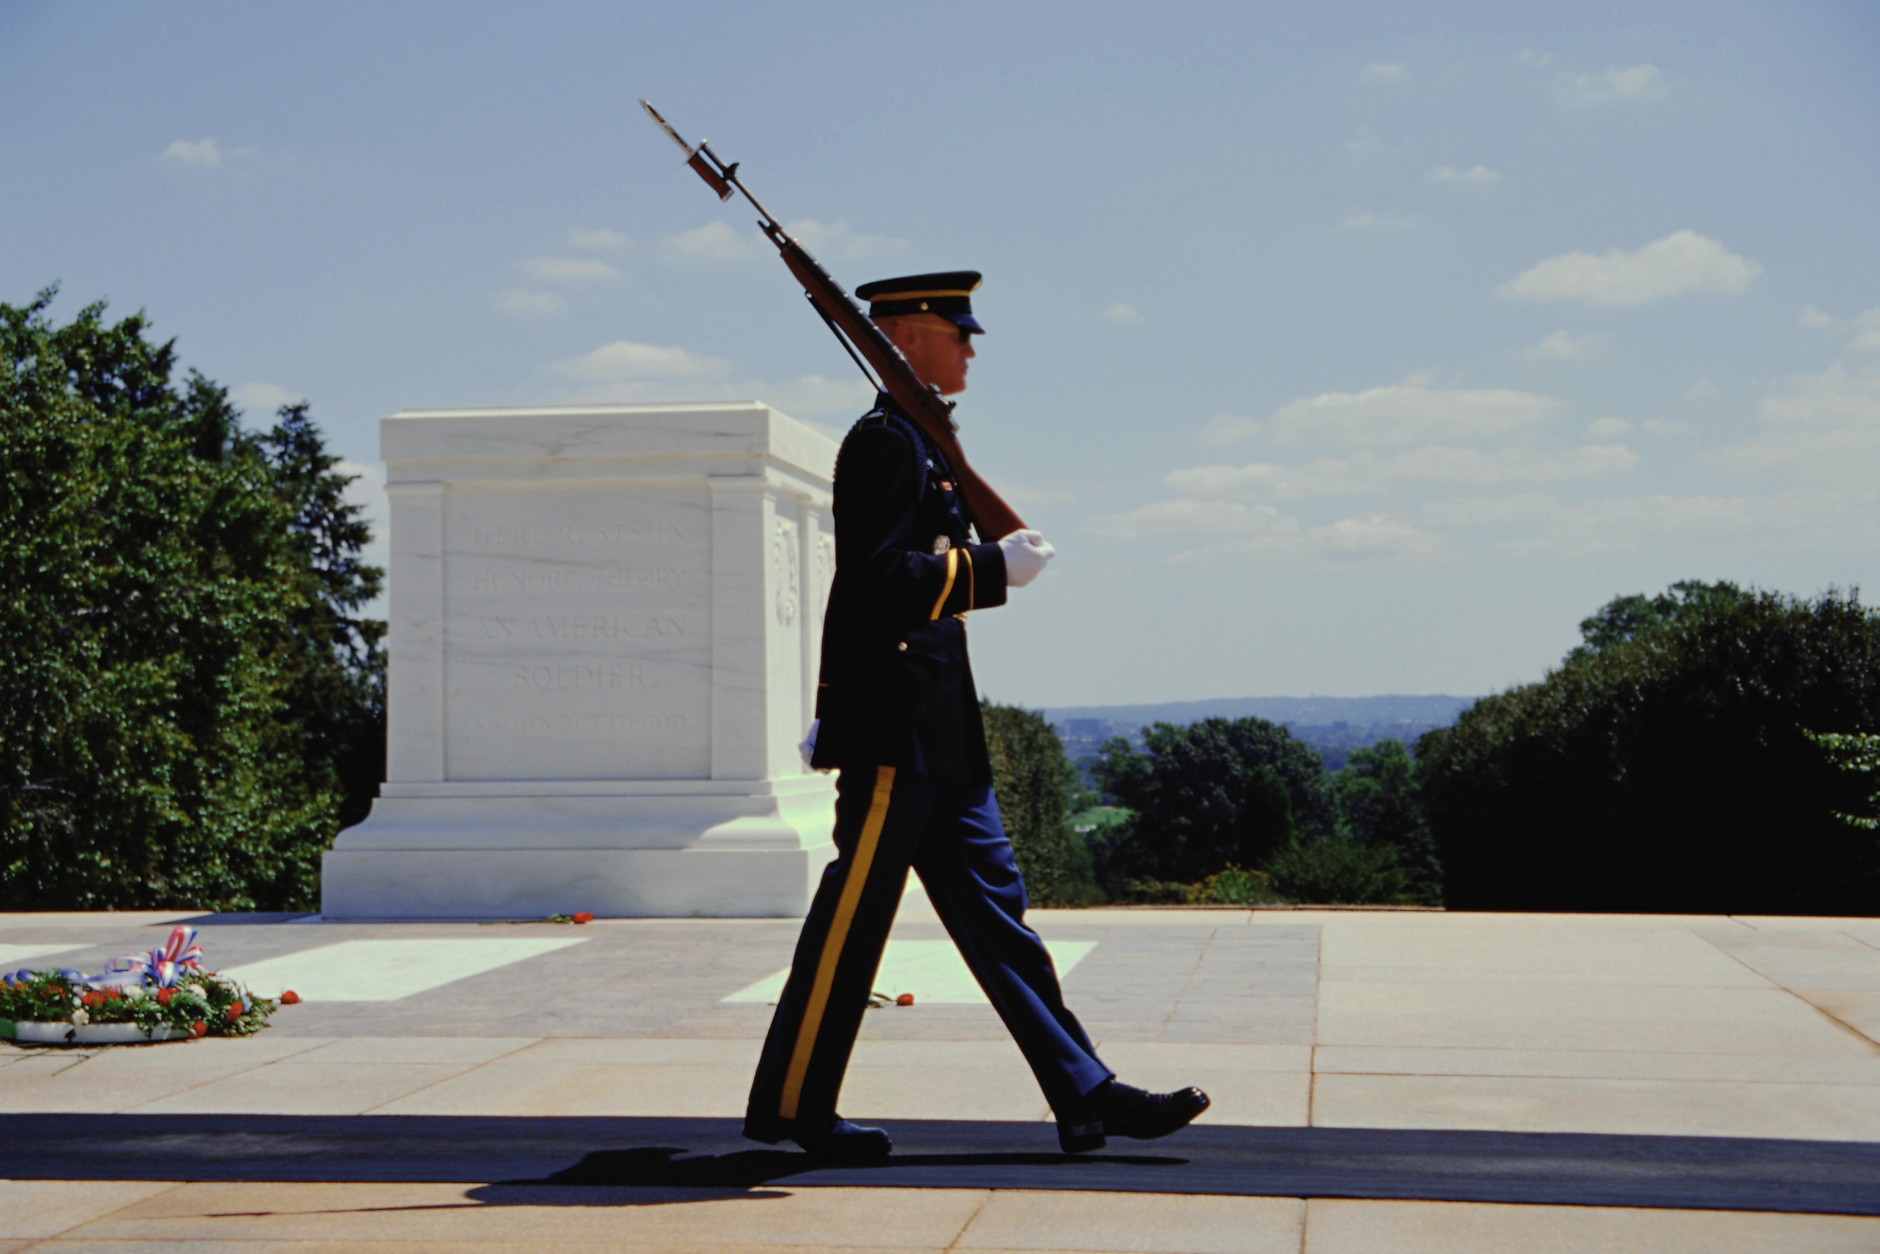 It may not be for kids of every age, but the changing of the Guard at the Tomb of the Unknowns, in Arlington National Cemetery, is dignified, regal and riveting. You can see it every hour between 8 a.m. and 5 p.m. through March 31, then every half-hour from 8 a.m. to 7 p.m. April 1 to Sept. 30. 

(Getty Images)